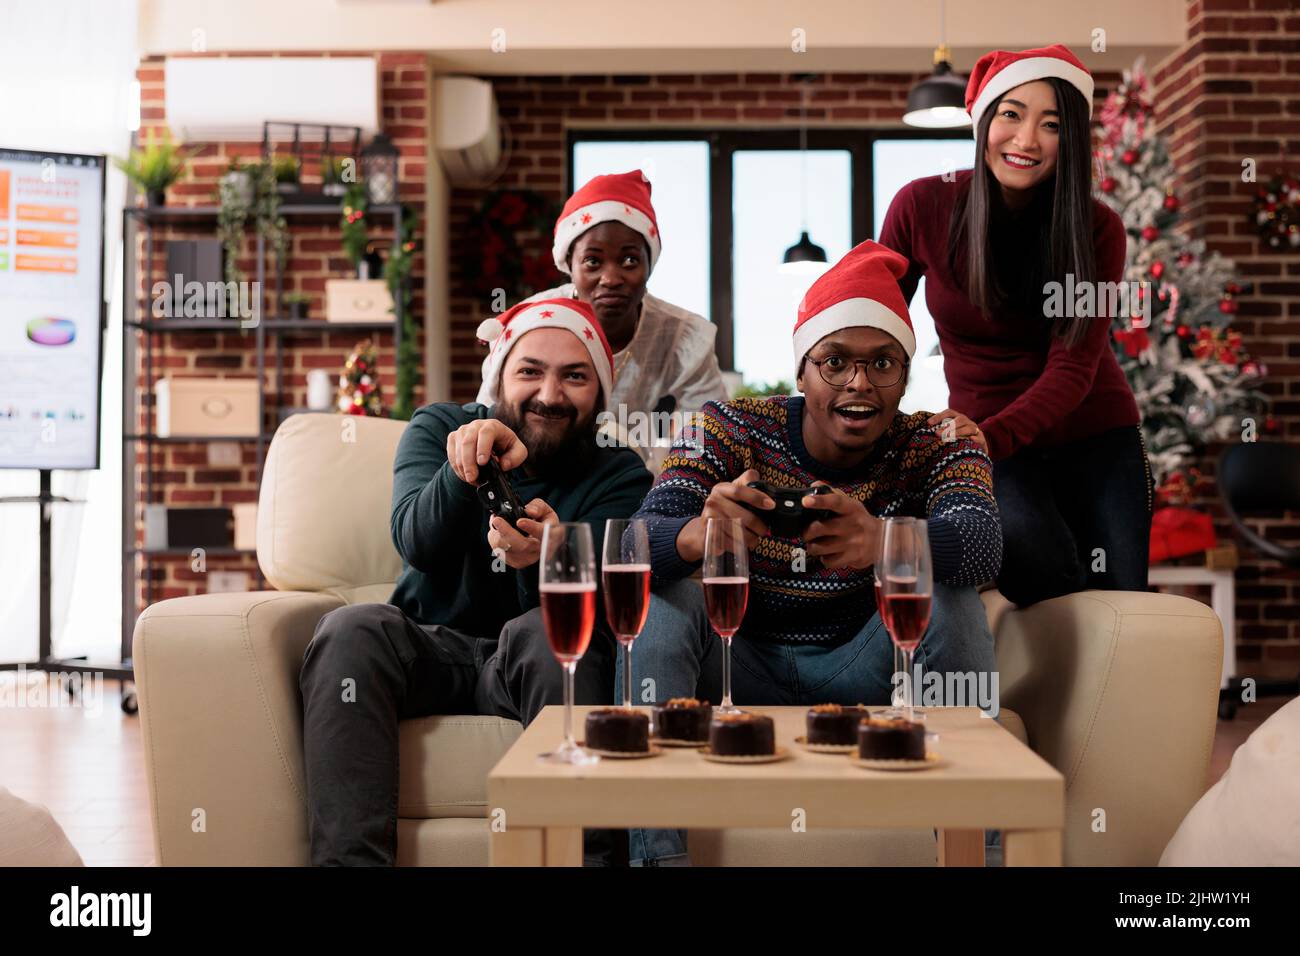 Multiethnic group of people playing video games, wearing santa hat at festive office party. Celebrating christmas eve festivity in workplace with xmas decorations, having fun with gaming console. Stock Photo